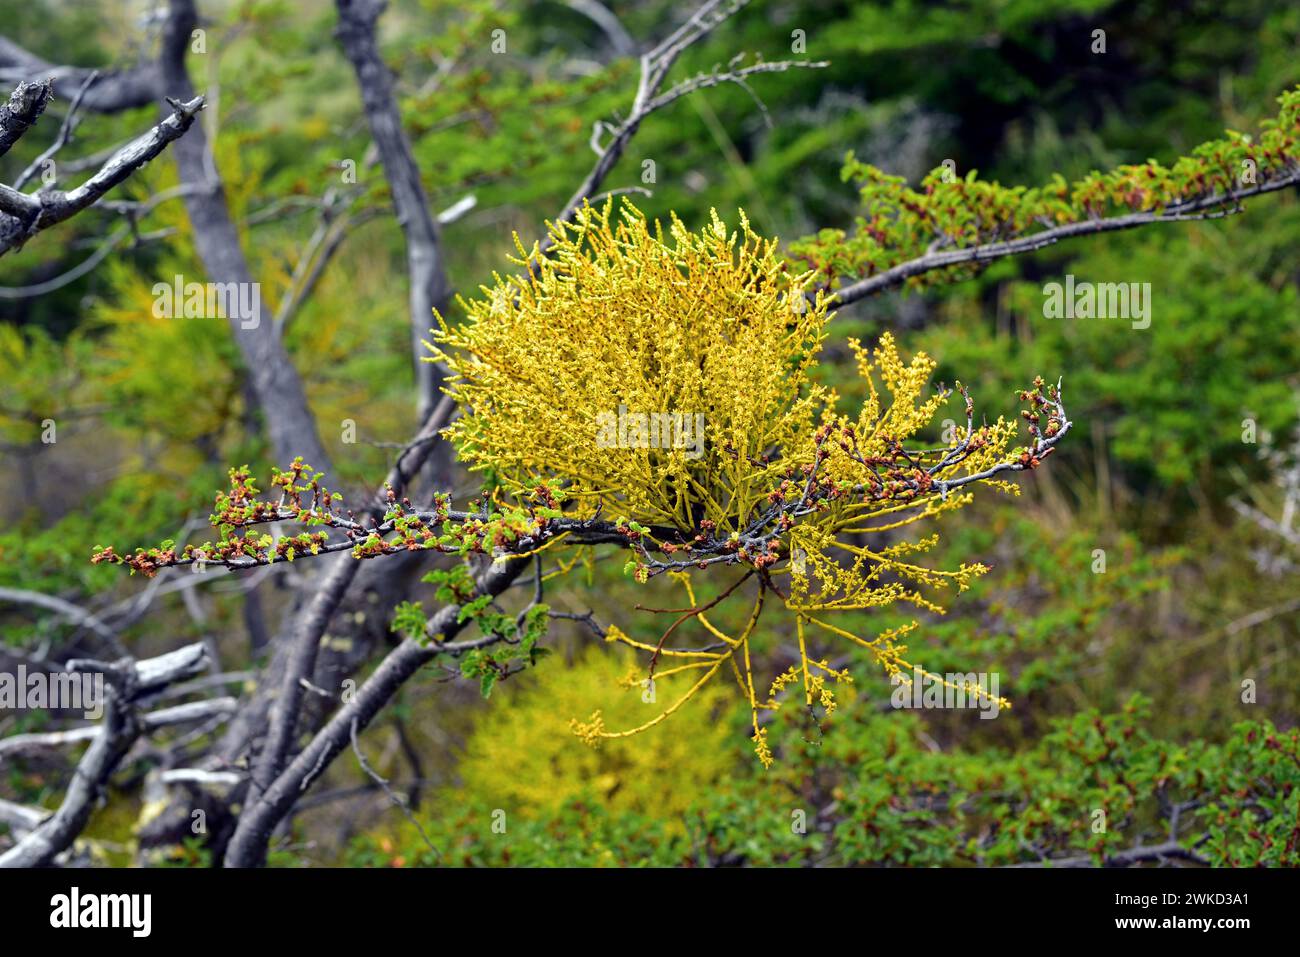 Farolito chino (Misodendrum punctulatum) is an hemiparasite shrub native to central and southern Andes from Chile and Argentina. The parasitized tree Stock Photo